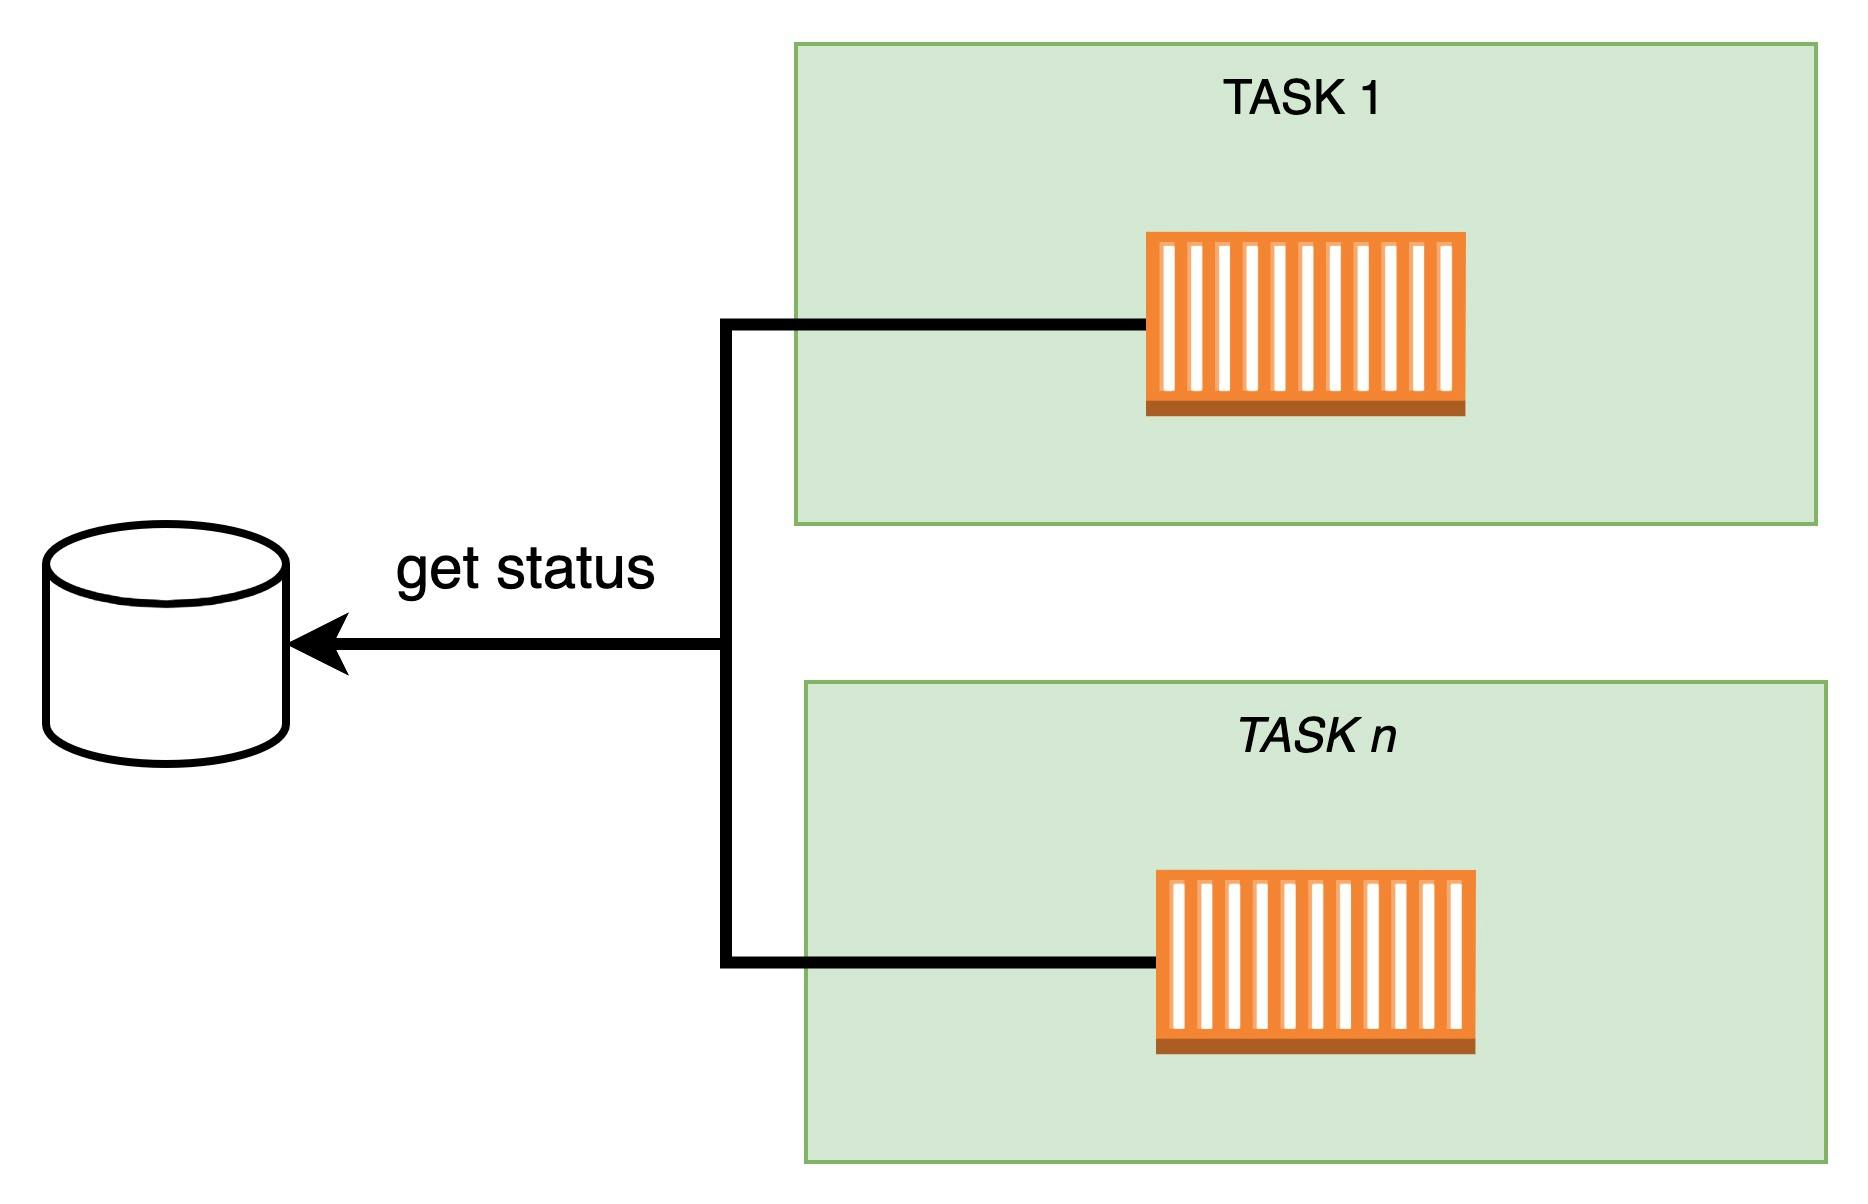 Task querying directly the database